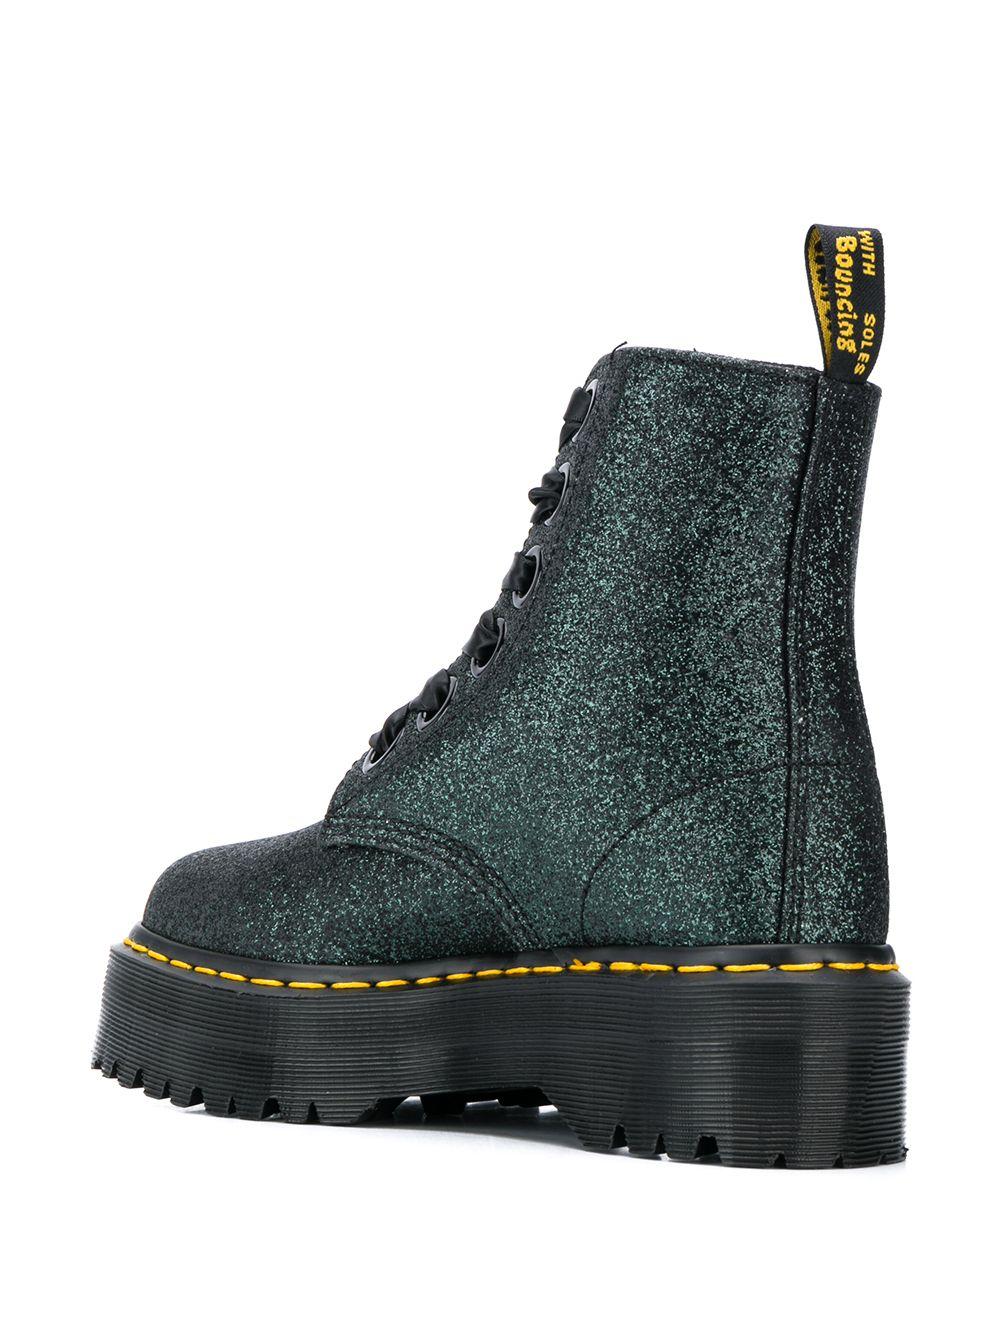 Dr. Martens Leather Dr. Martens Molly 